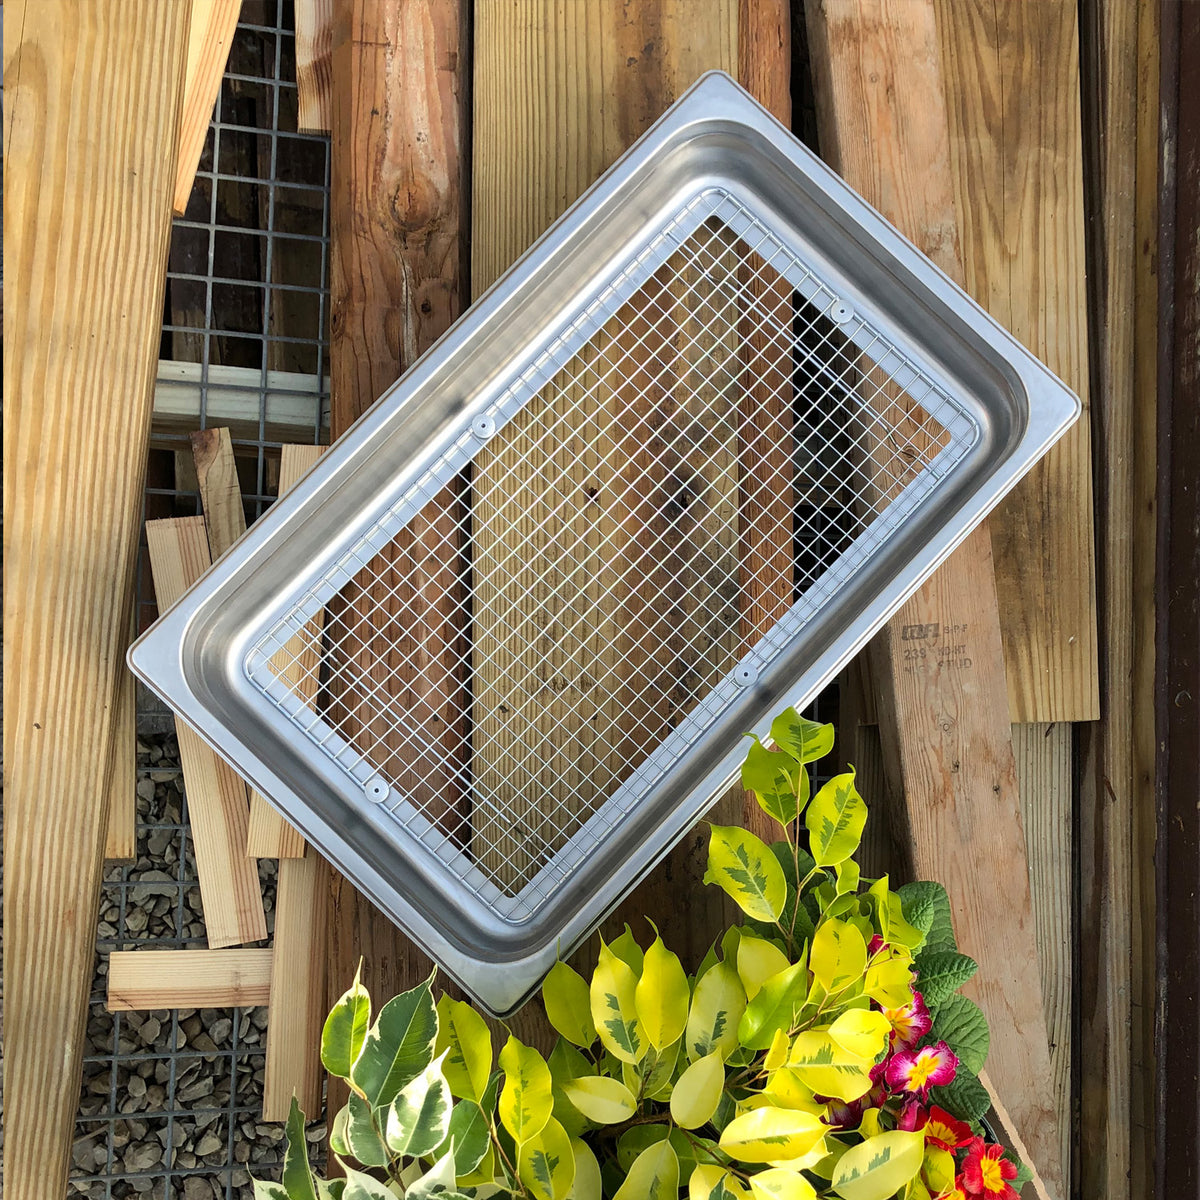 Stainless Garden Sifter - Compost, Dirt and Potting Soil